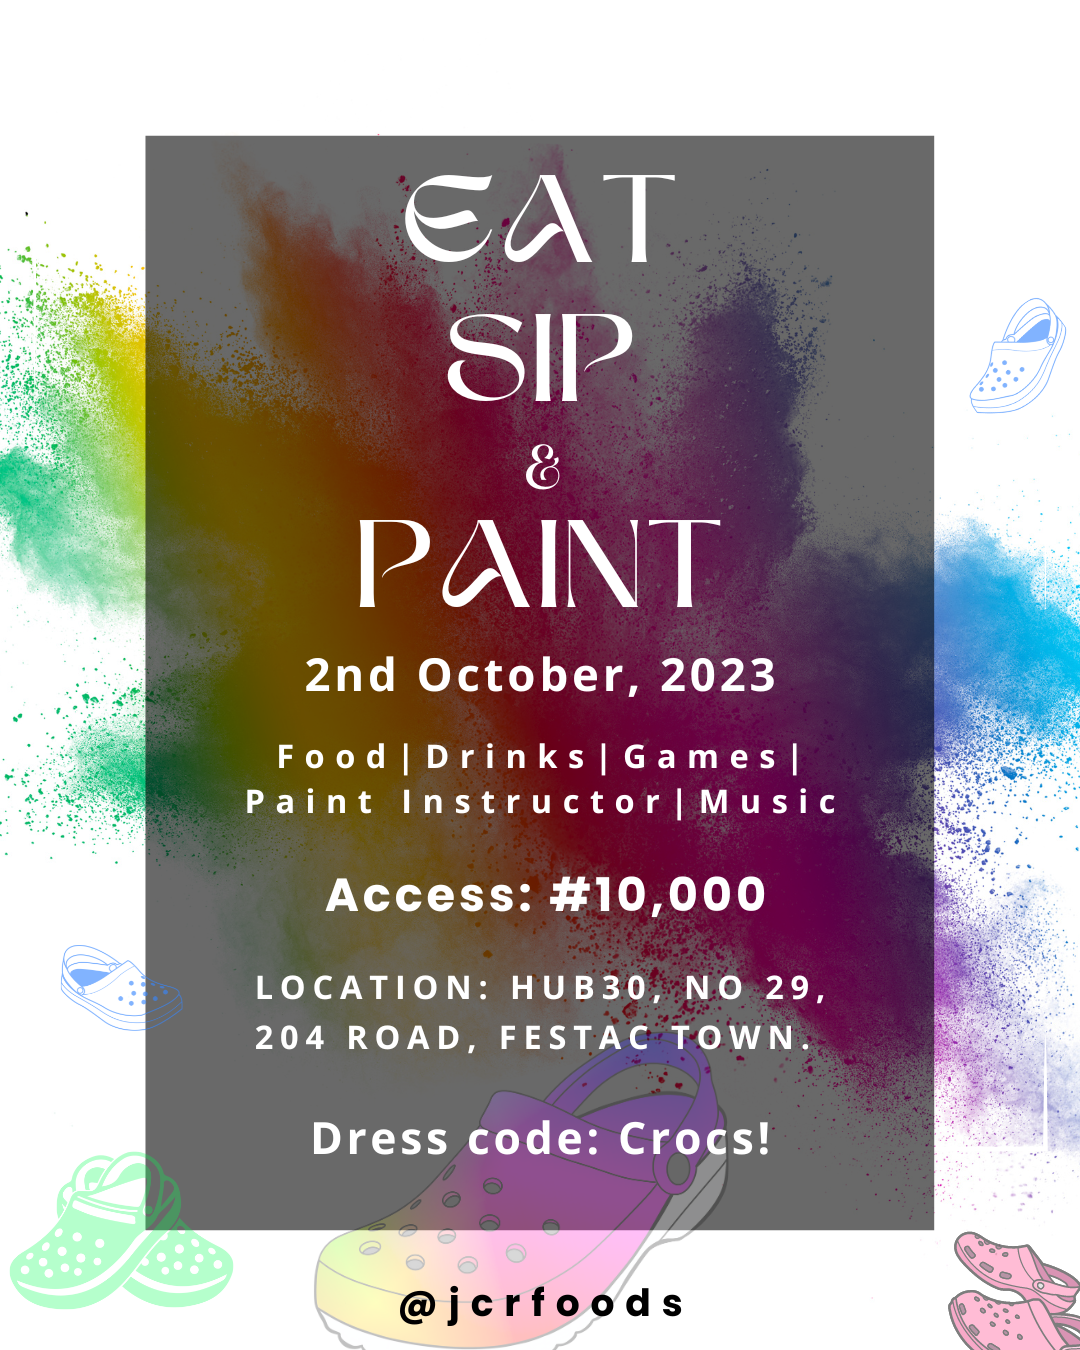 Eat, Sip & Paint Post free event in Nigeria using tickethub.ng, buy and sell tickets to event